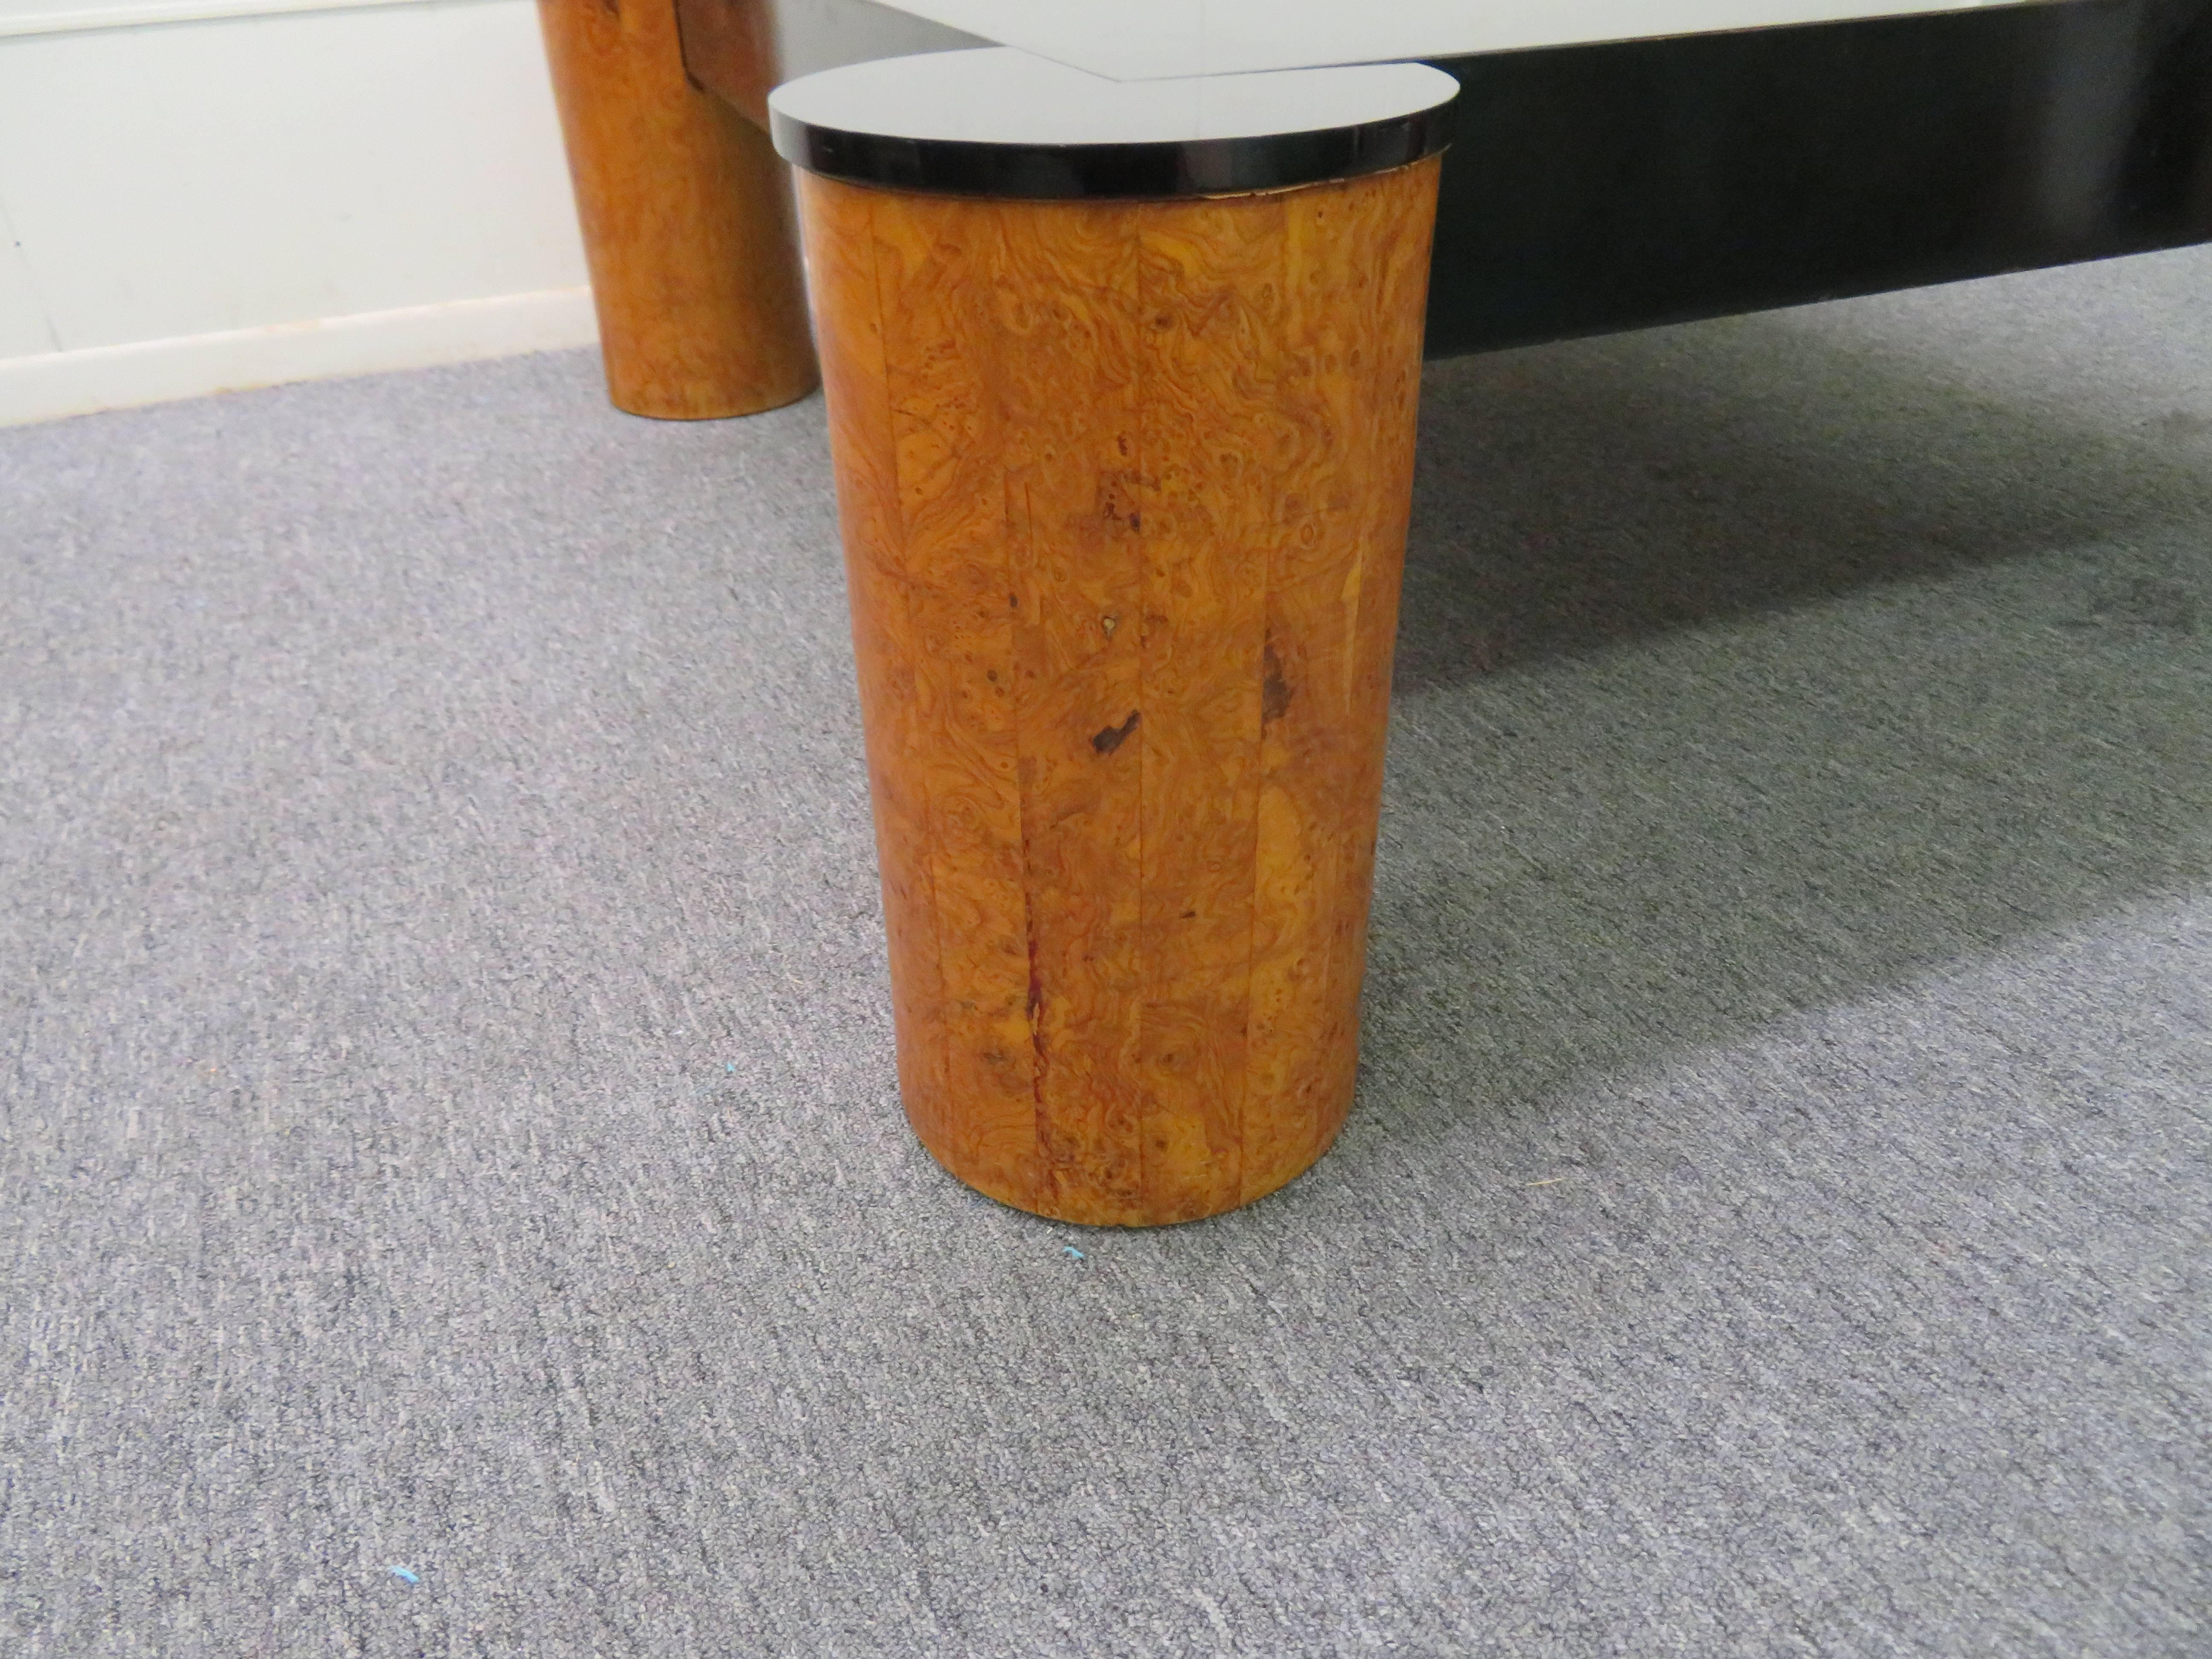 Gorgeous Karl Springer style burled olive wood and black lacquered coffee table. We love the large-scale olive wood cylinder legs in contrast to the black lacquered top.